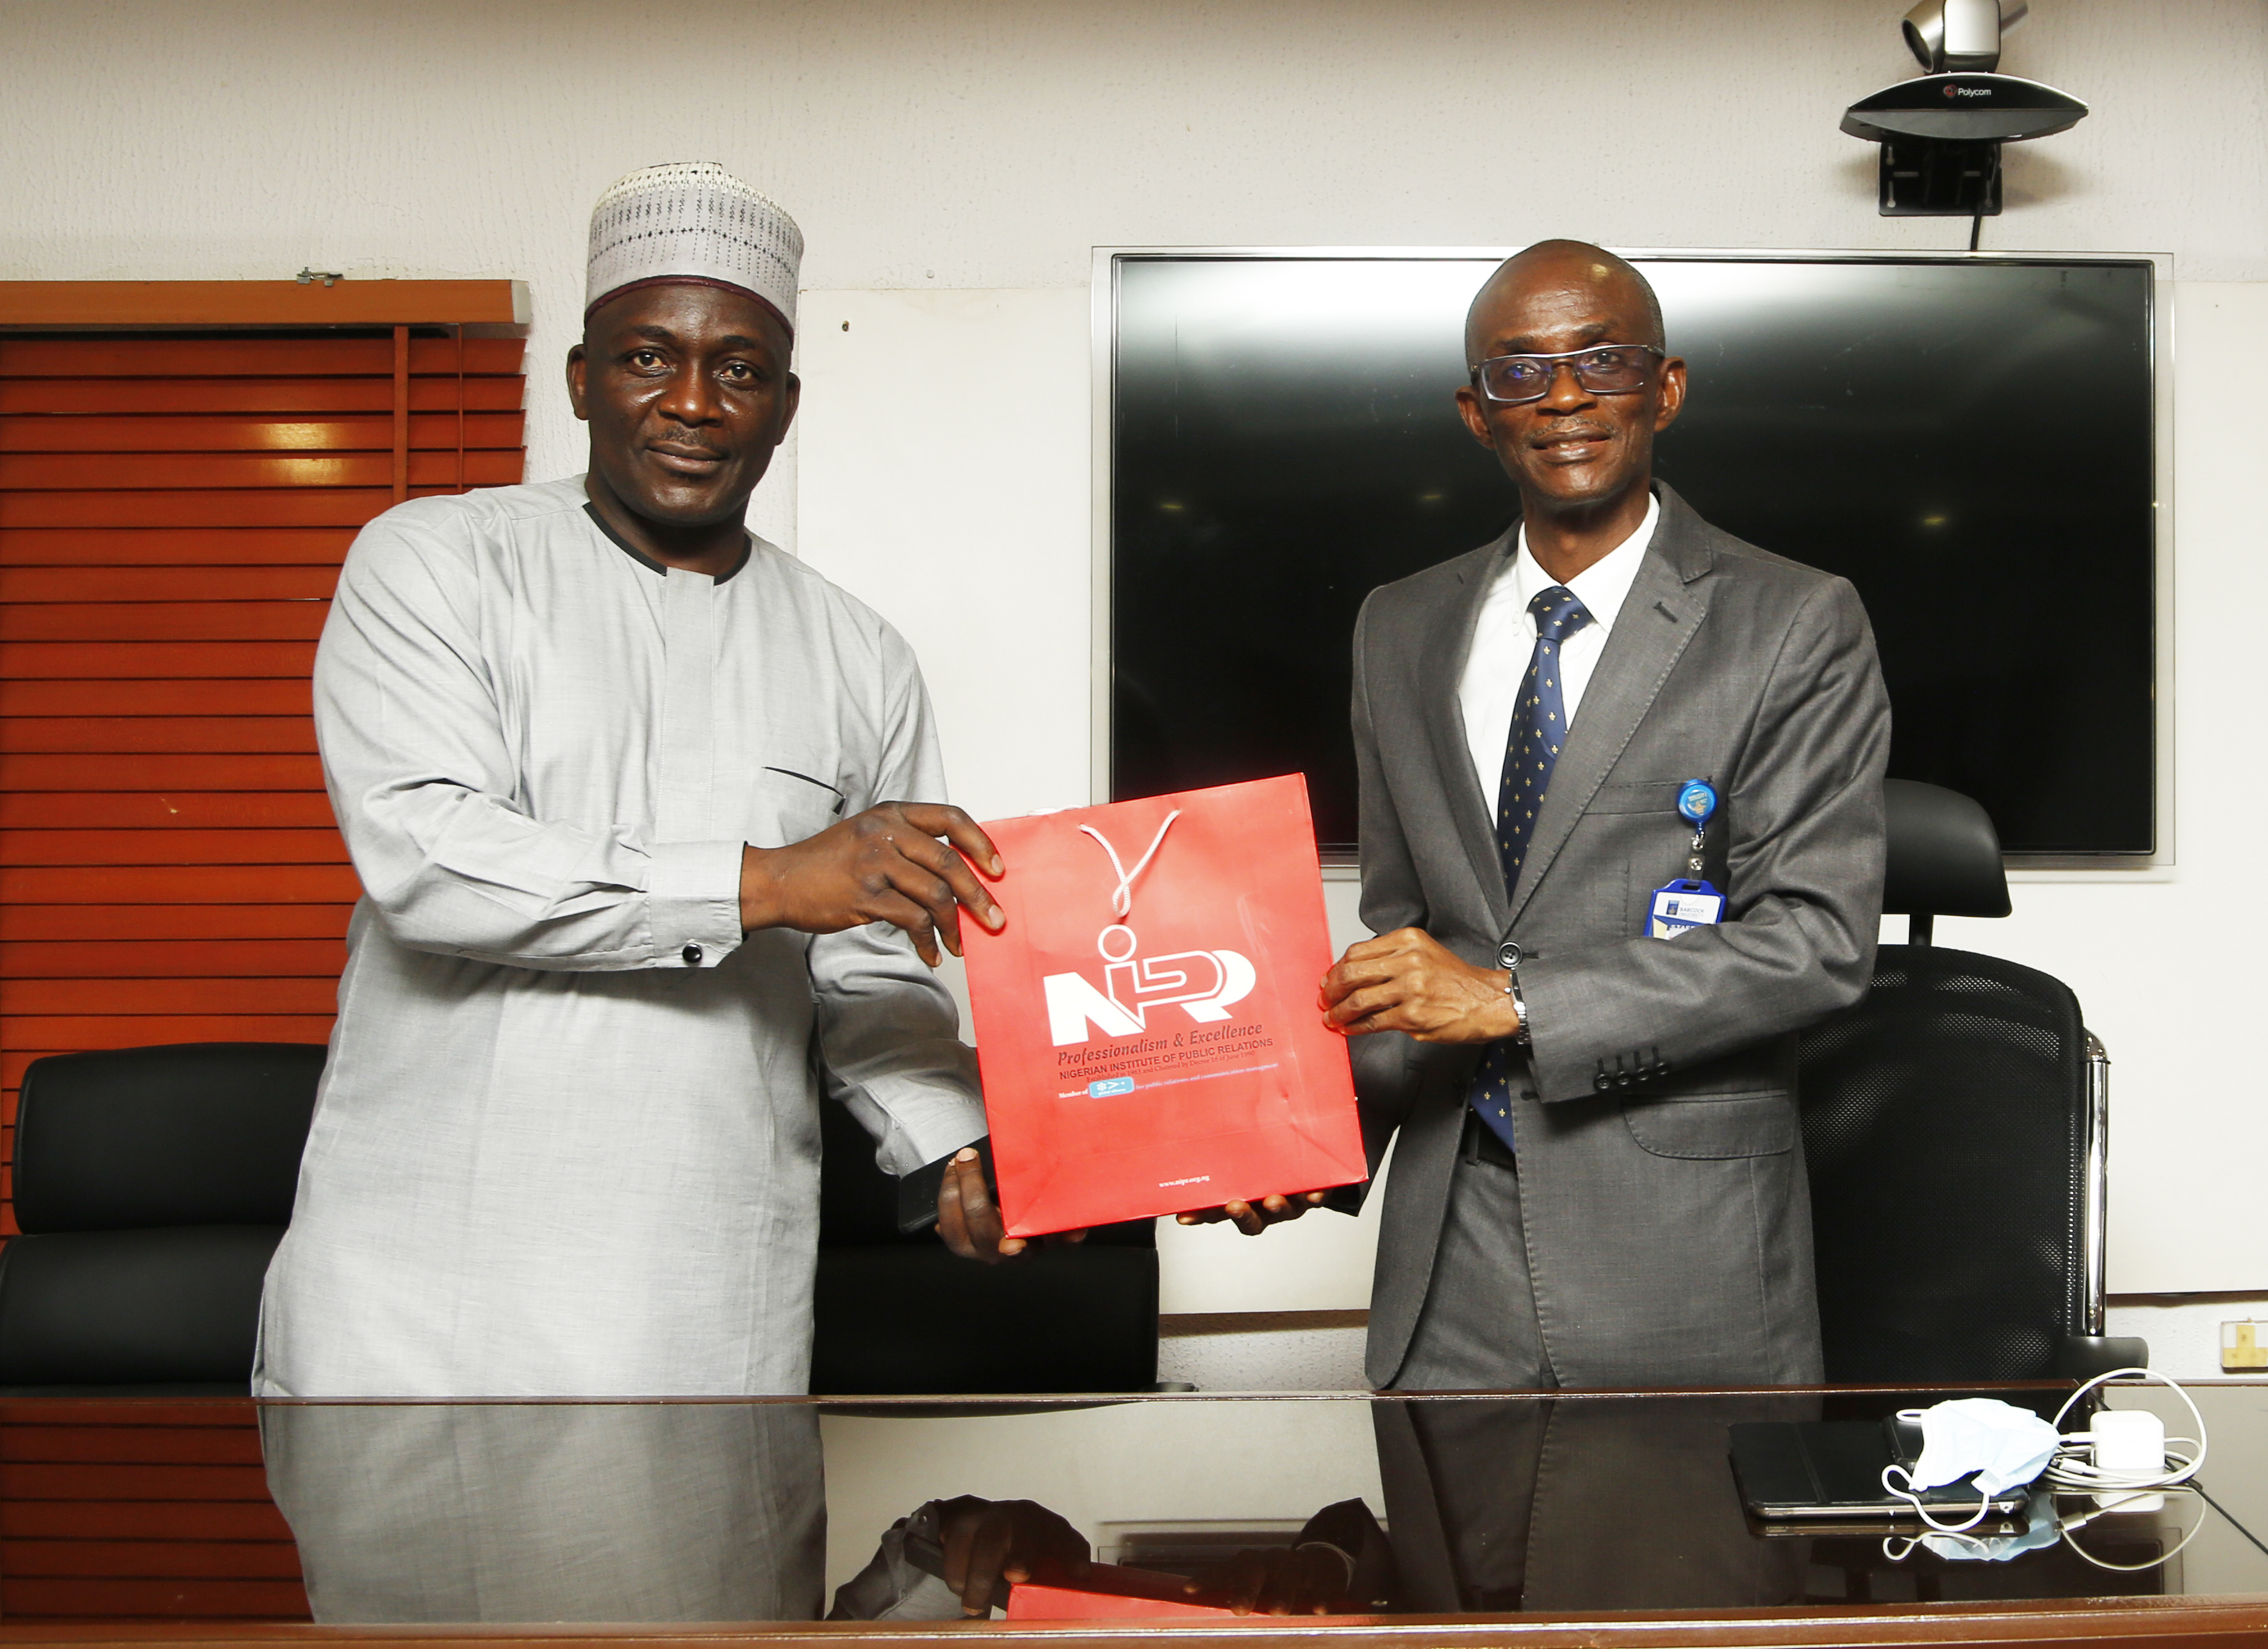 BABCOCK WELCOMES THE NIGERIAN INSTITUTE OF PUBLIC RELATIONS (NIPR)